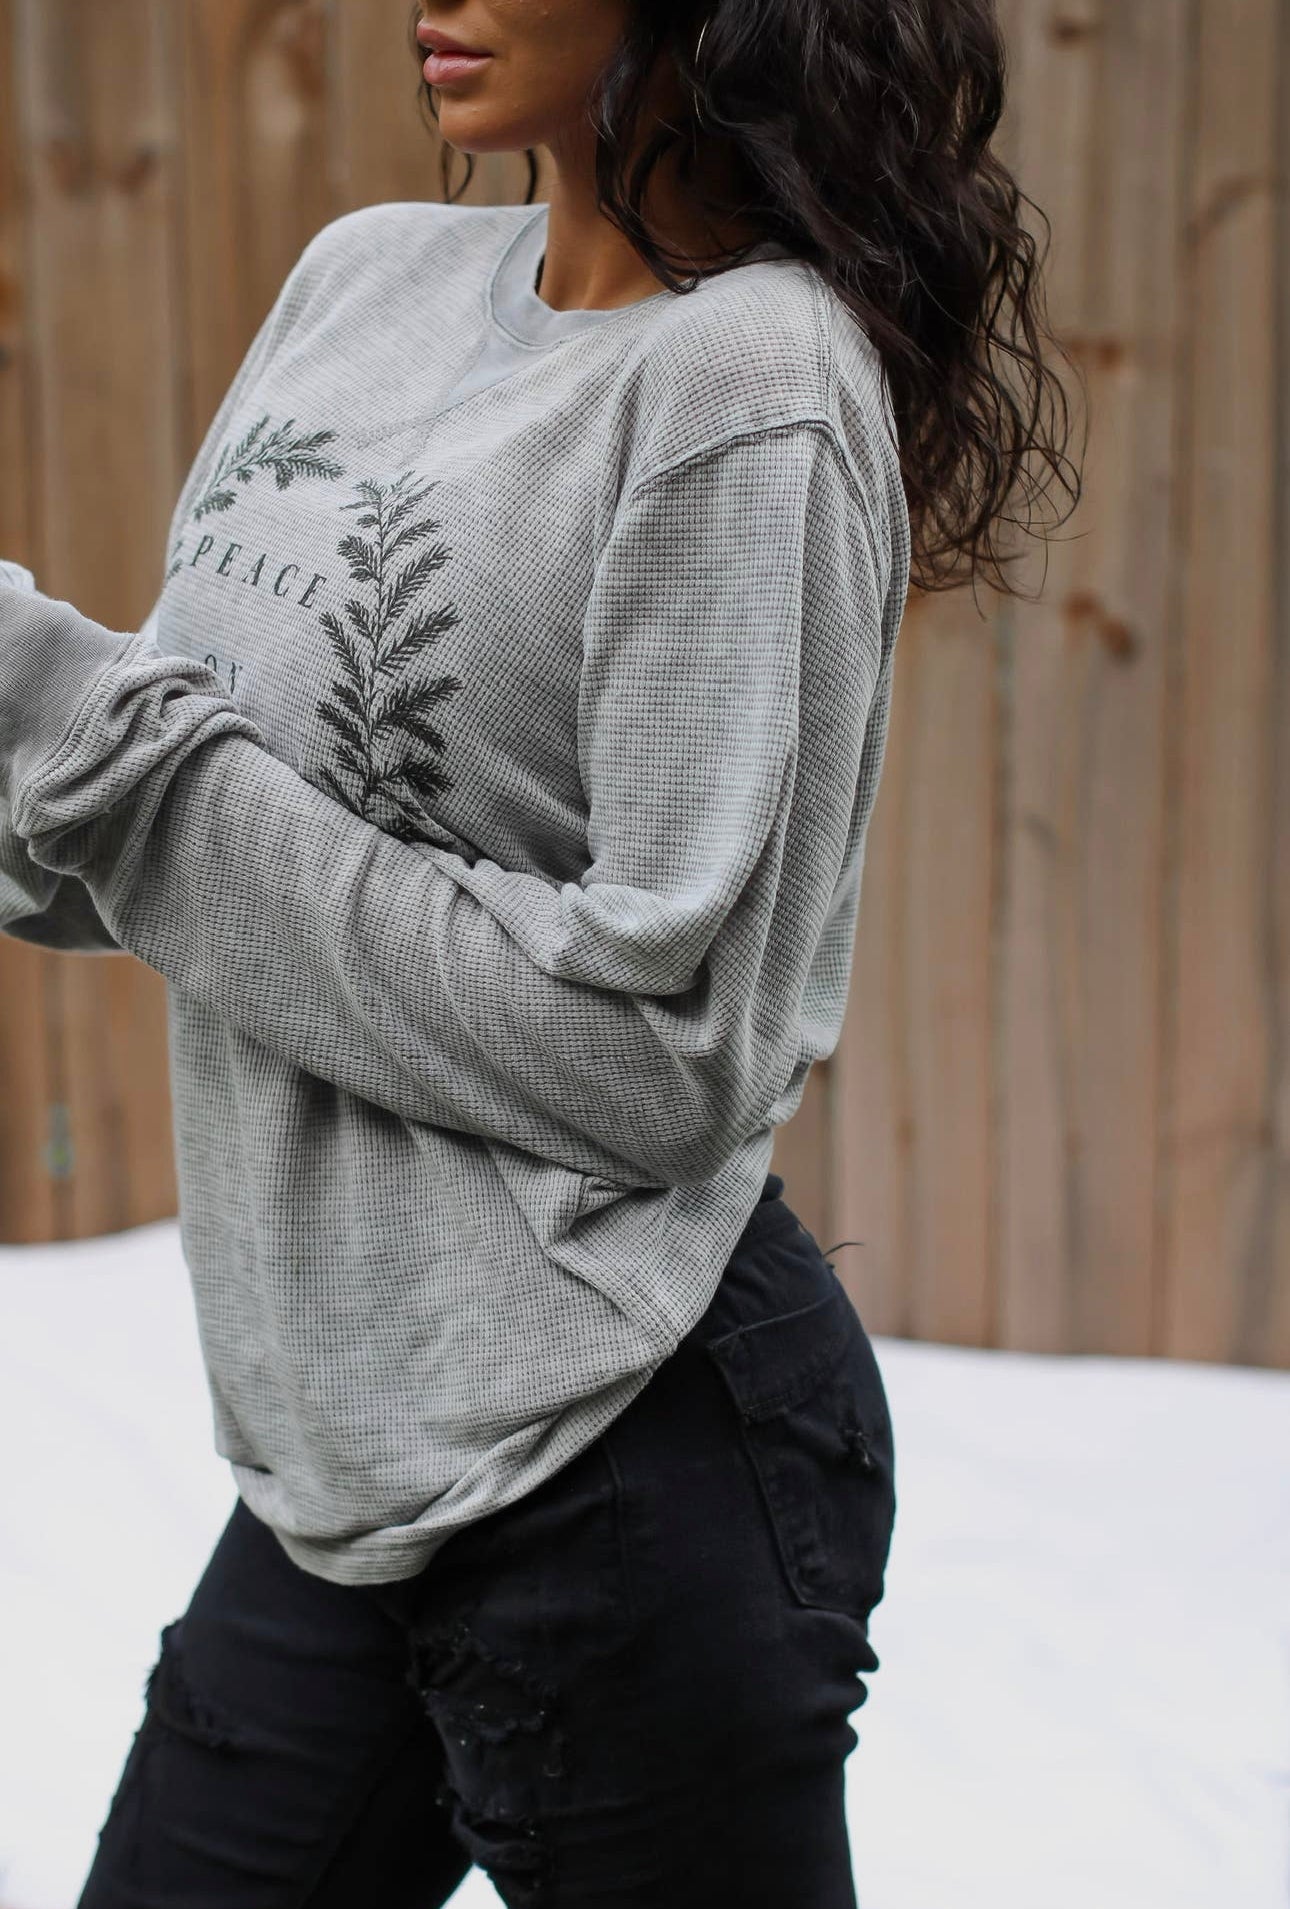 Peace on Earth Long Sleeve Thermal